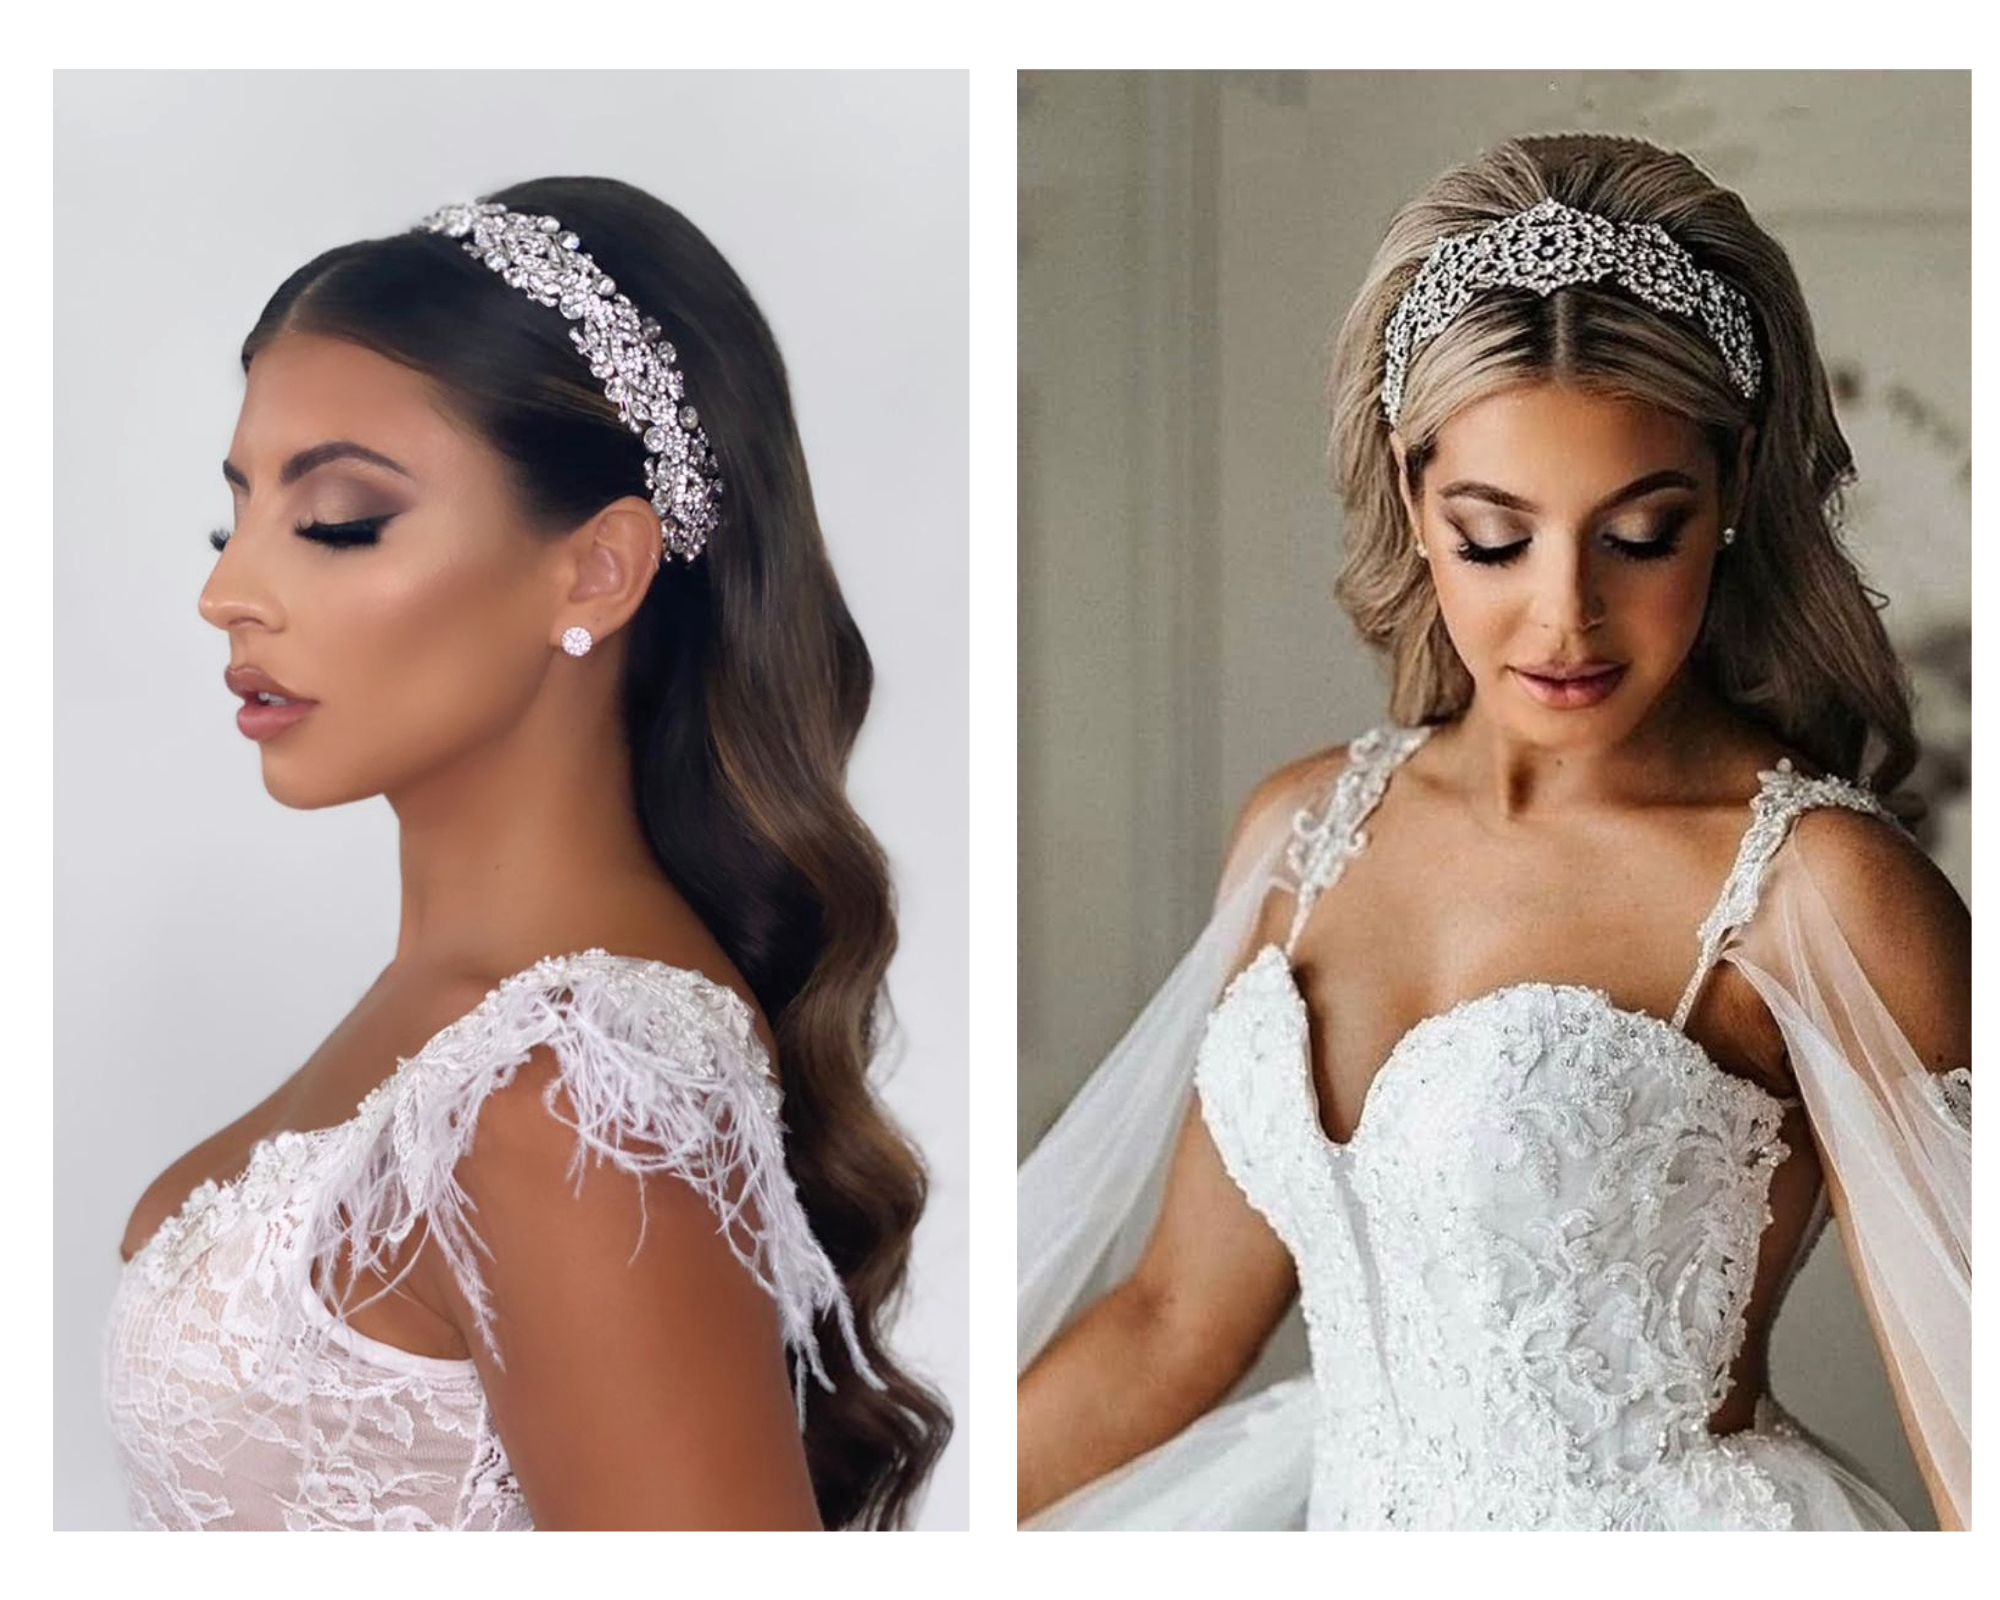 Two pictures of brides with their long hair down and wearing sparkling Swarovski crystal bridal headbands.